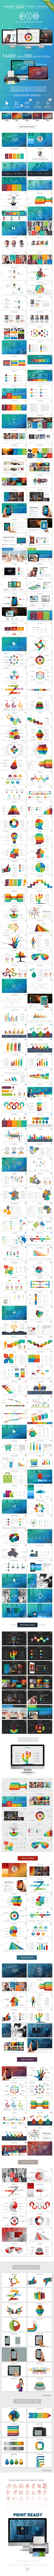 Fio - Complete Powerpoint Template - Print Ready